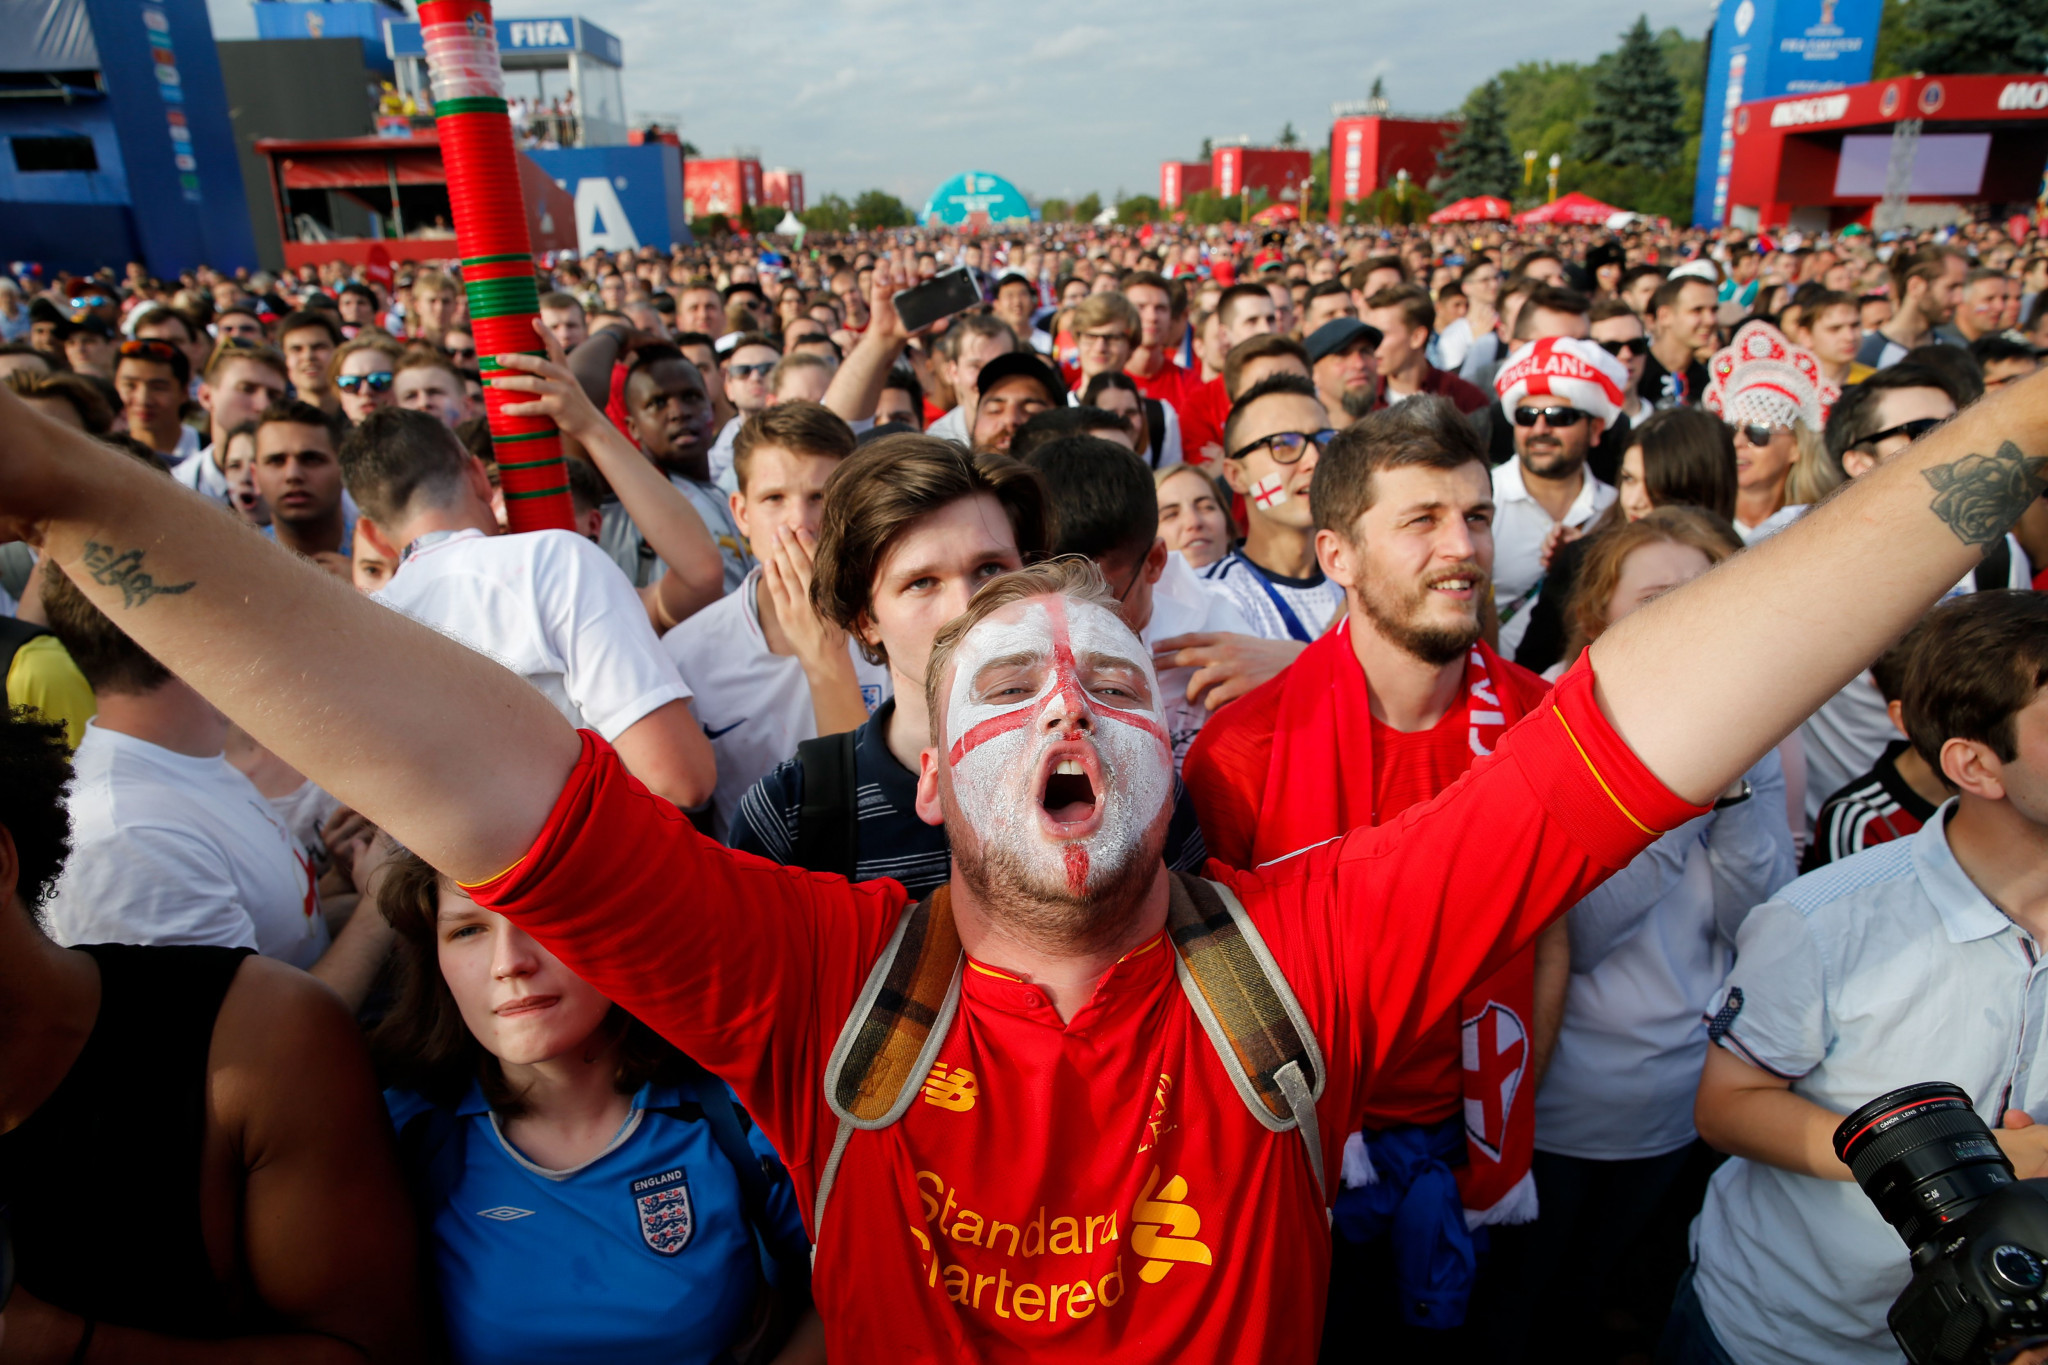 England fans celebrate at the Moscow Fan Fest ©Getty Images